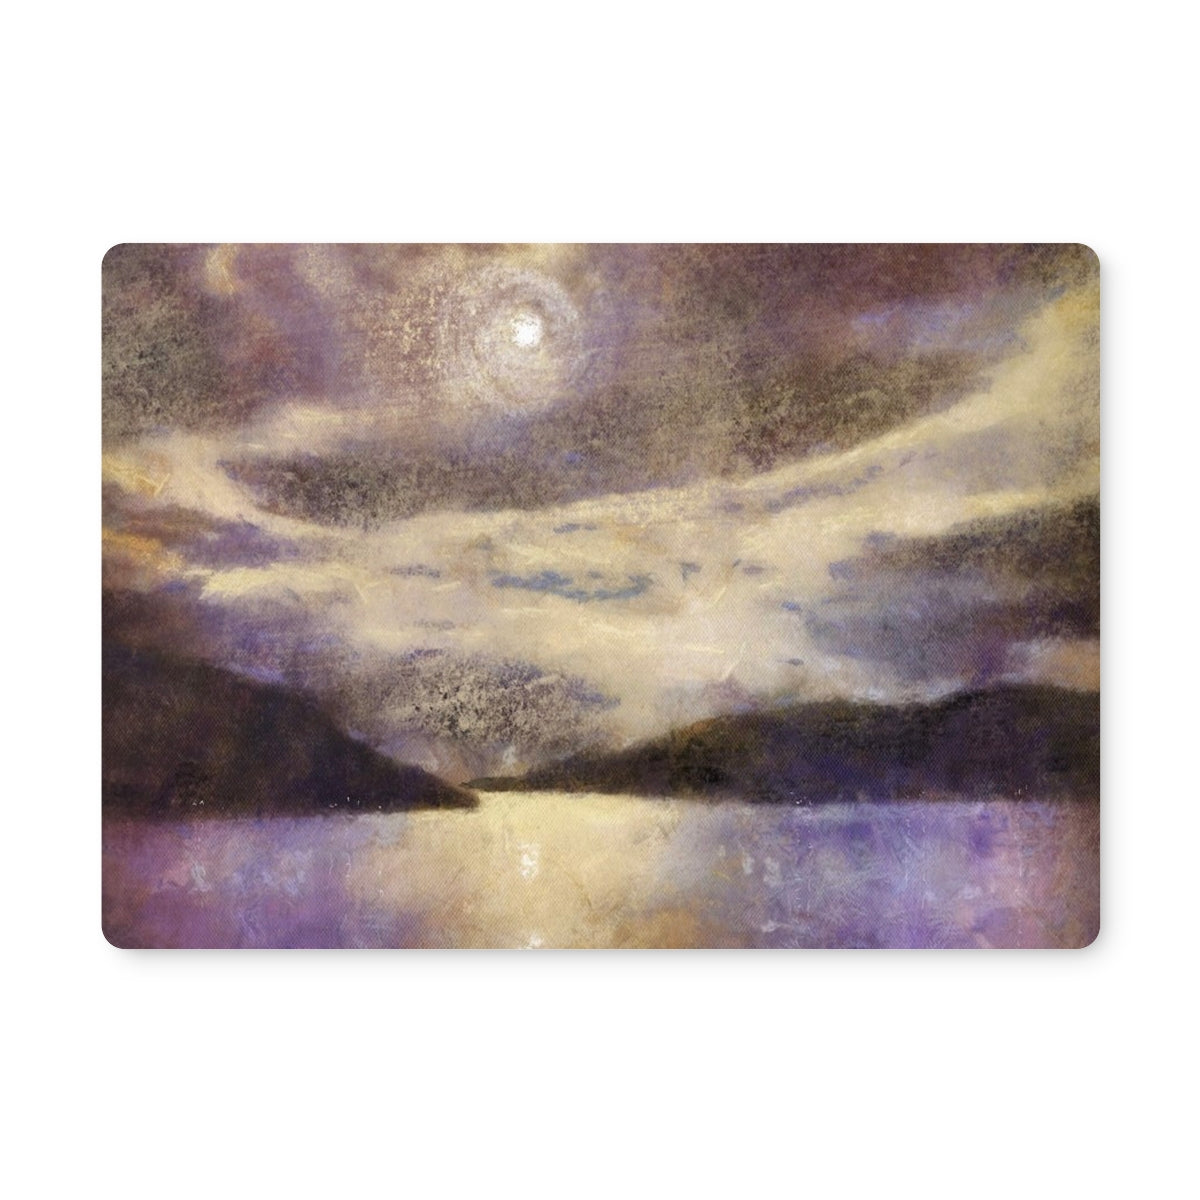 Moonlight Meets Lewis & Harris Art Gifts Placemat-Placemats-Hebridean Islands Art Gallery-6 Placemats-Paintings, Prints, Homeware, Art Gifts From Scotland By Scottish Artist Kevin Hunter